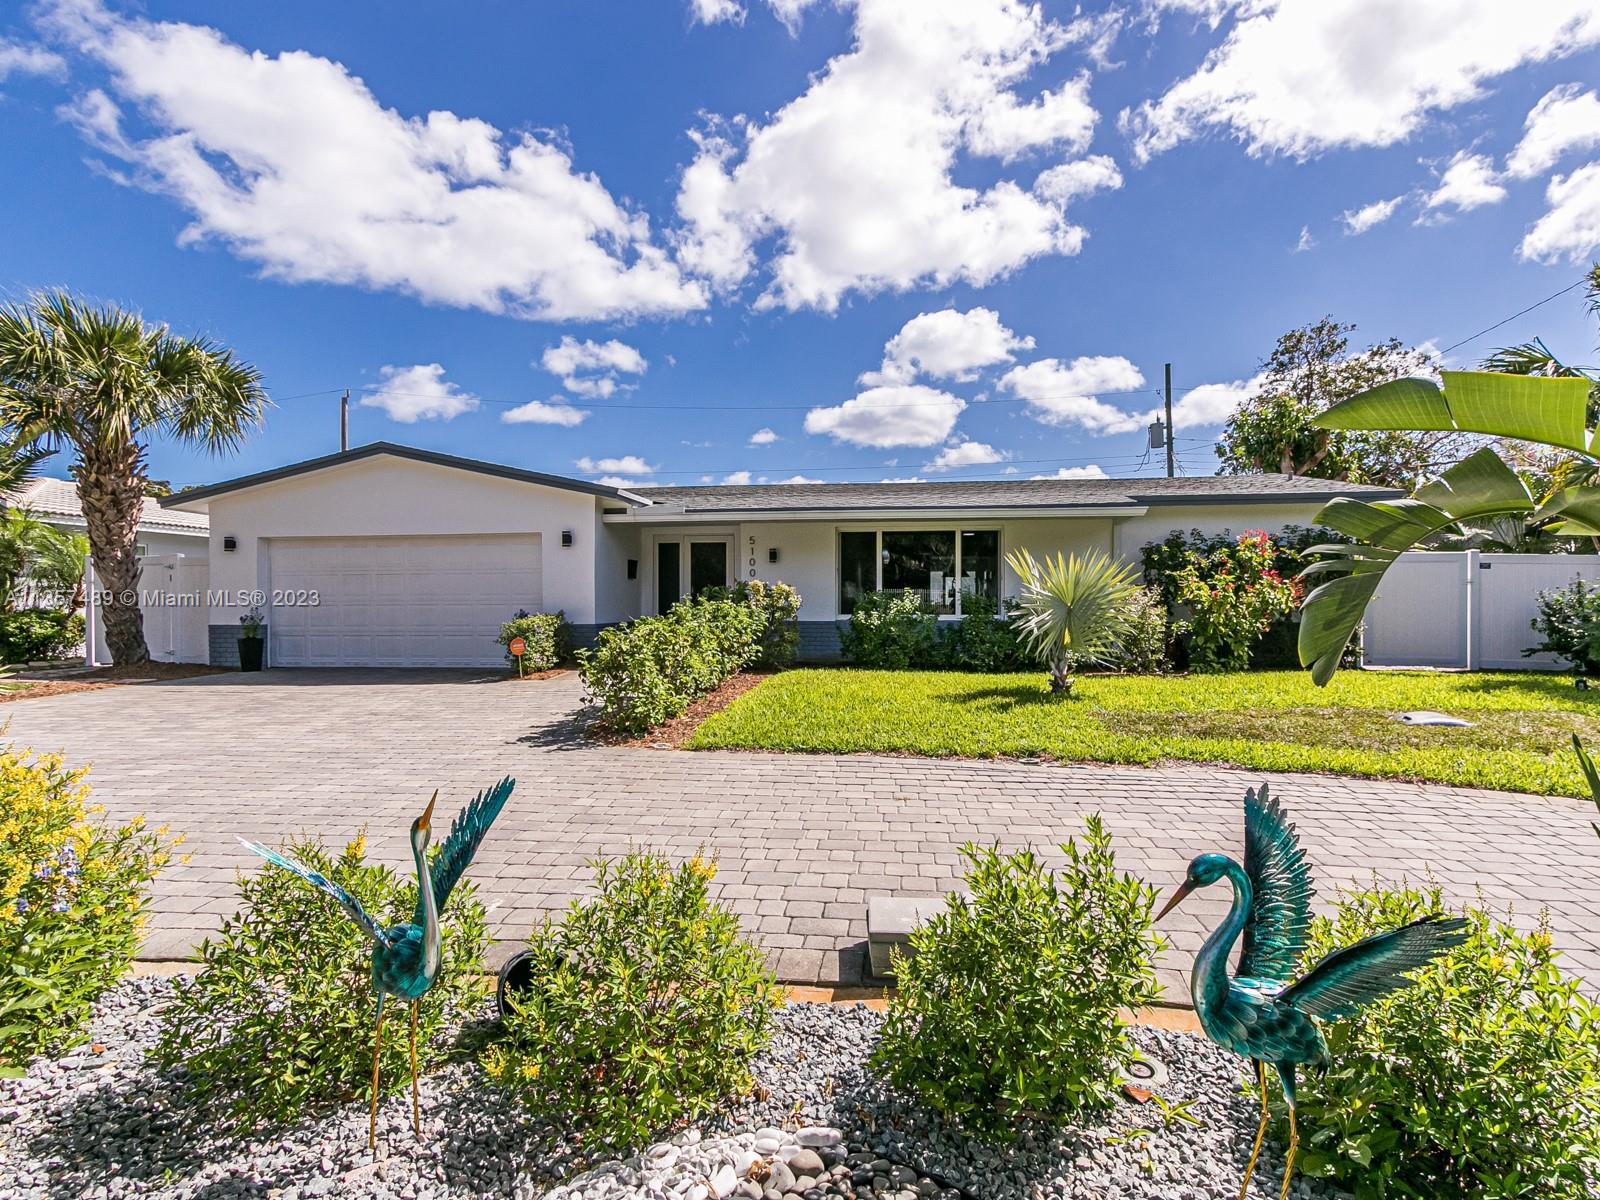 GORGEOUS HEATED POOL home in the desirable Coral Ridge Isle neighborhood only 2.1 miles to the beach